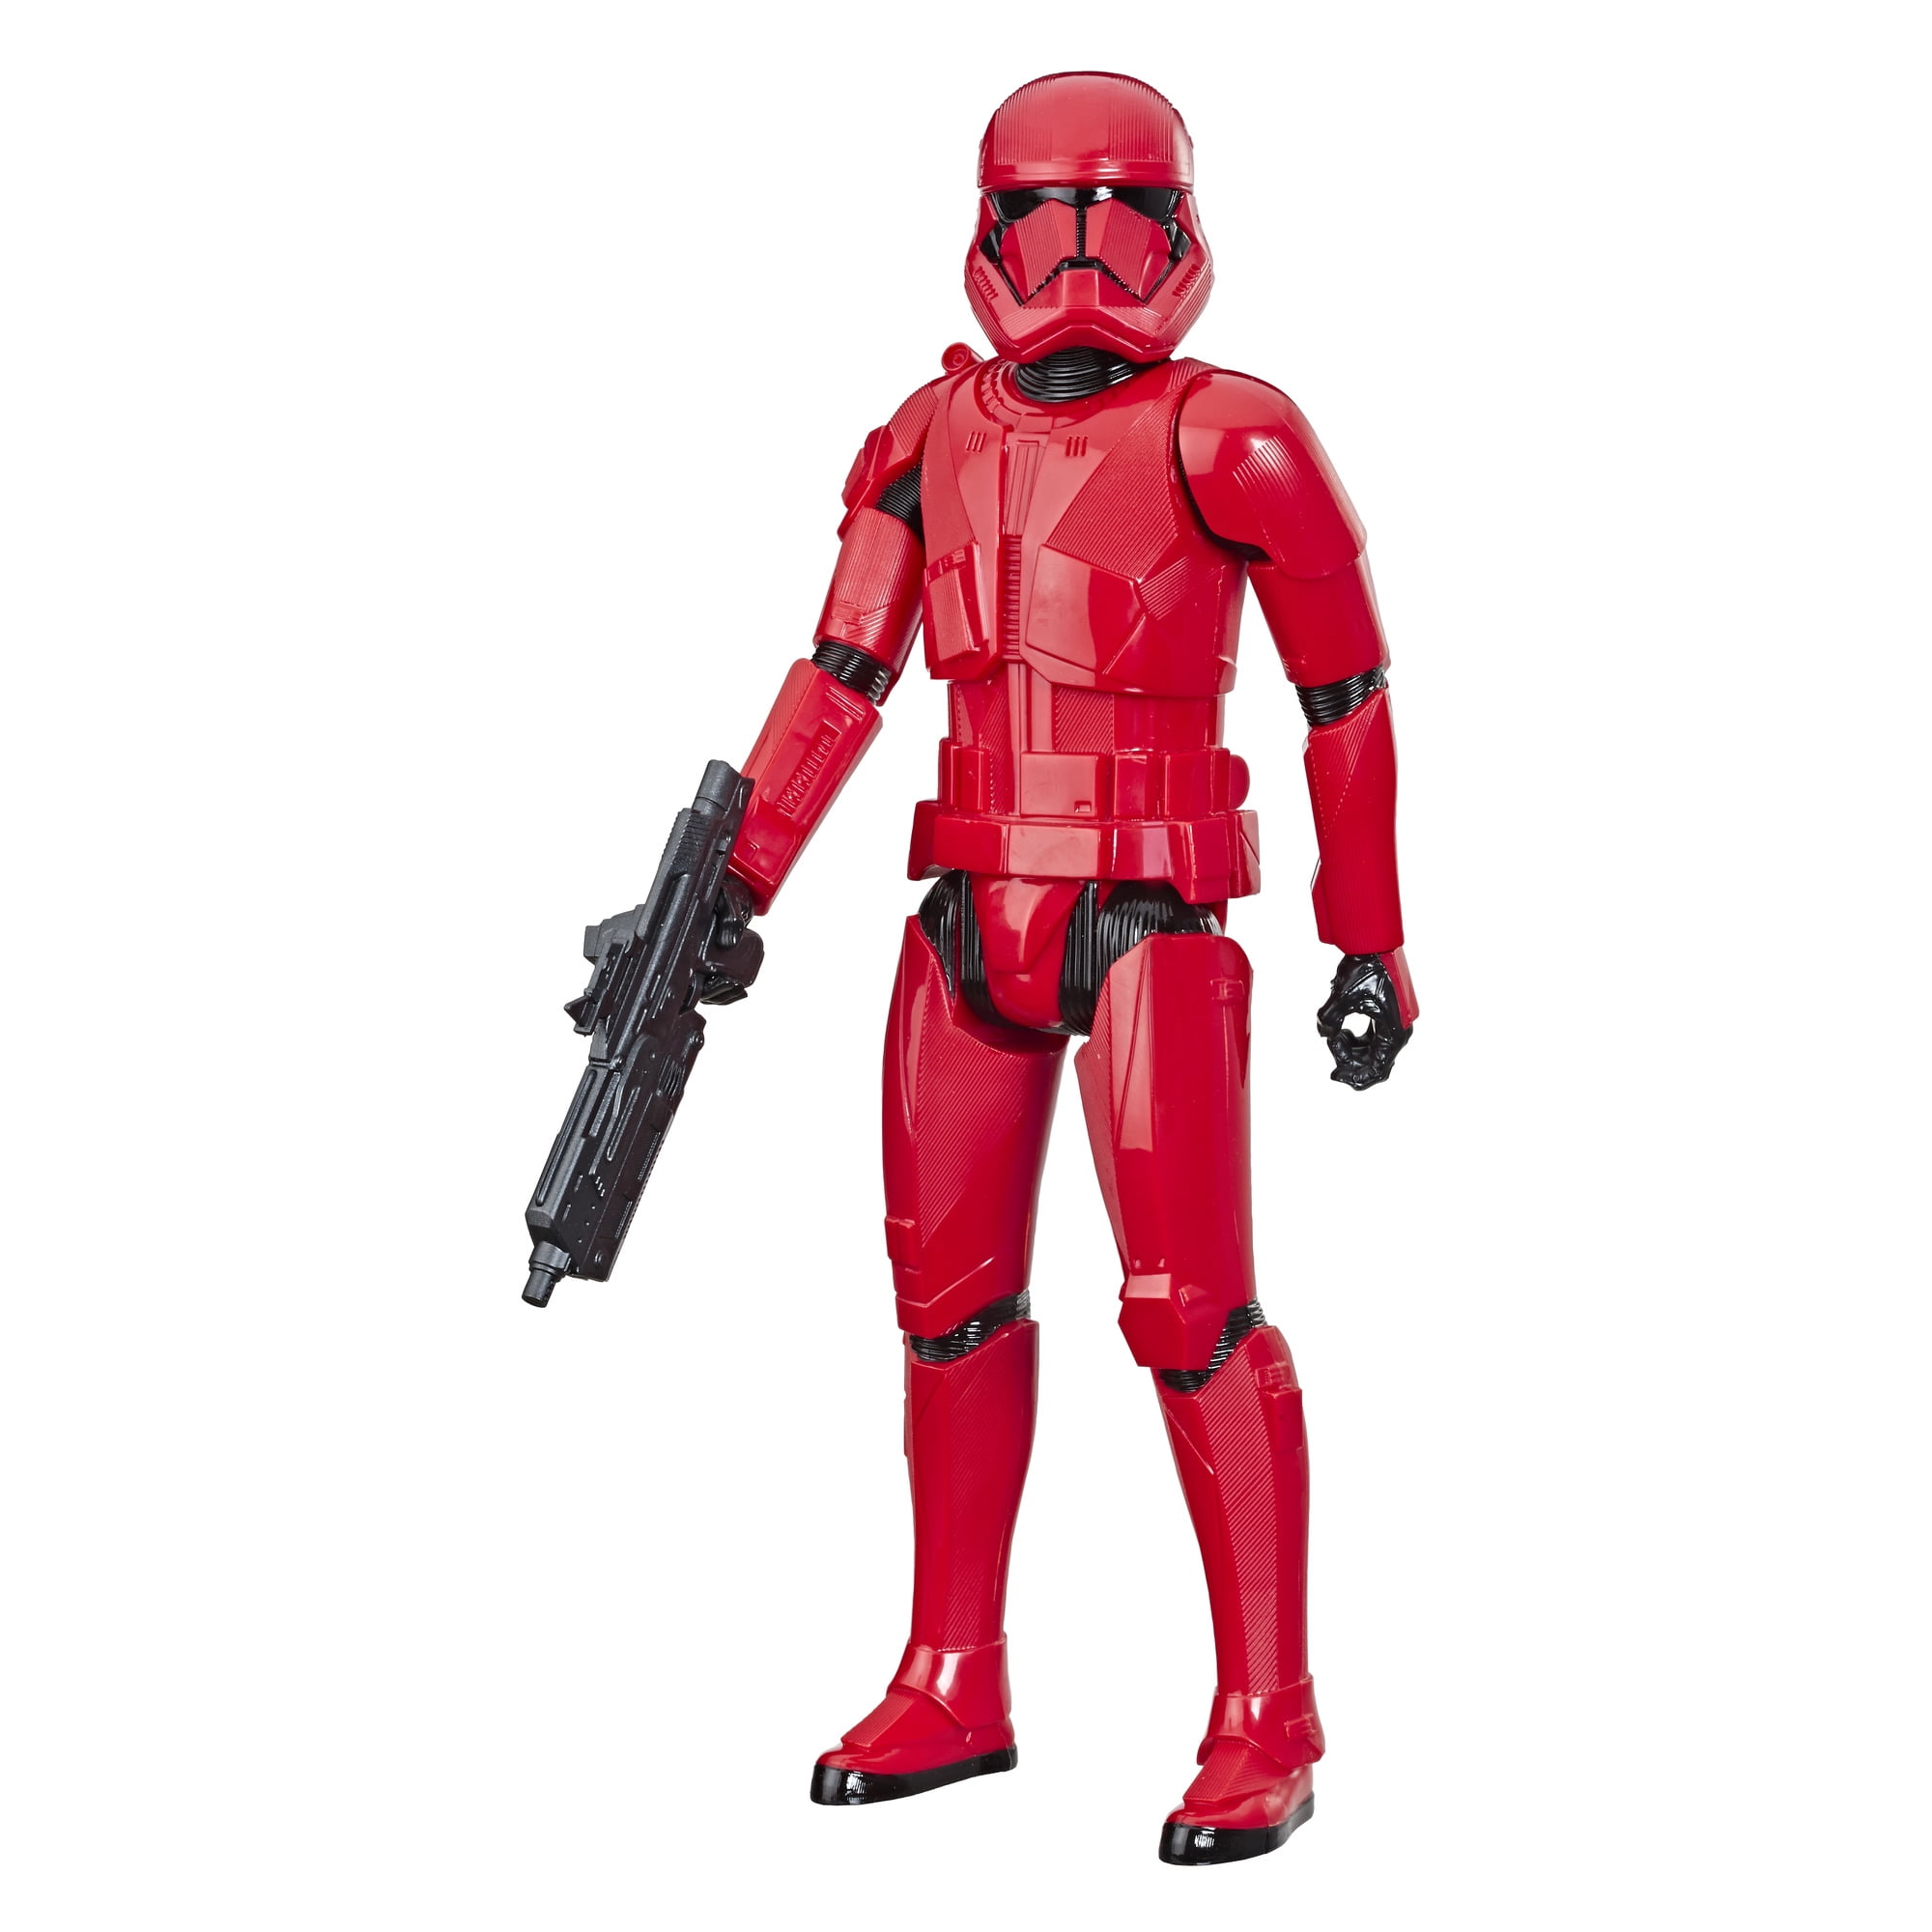 3.75"Star Wars Rise of Skywal Sith Trooper First Order Figurine Figure PLAYSET 